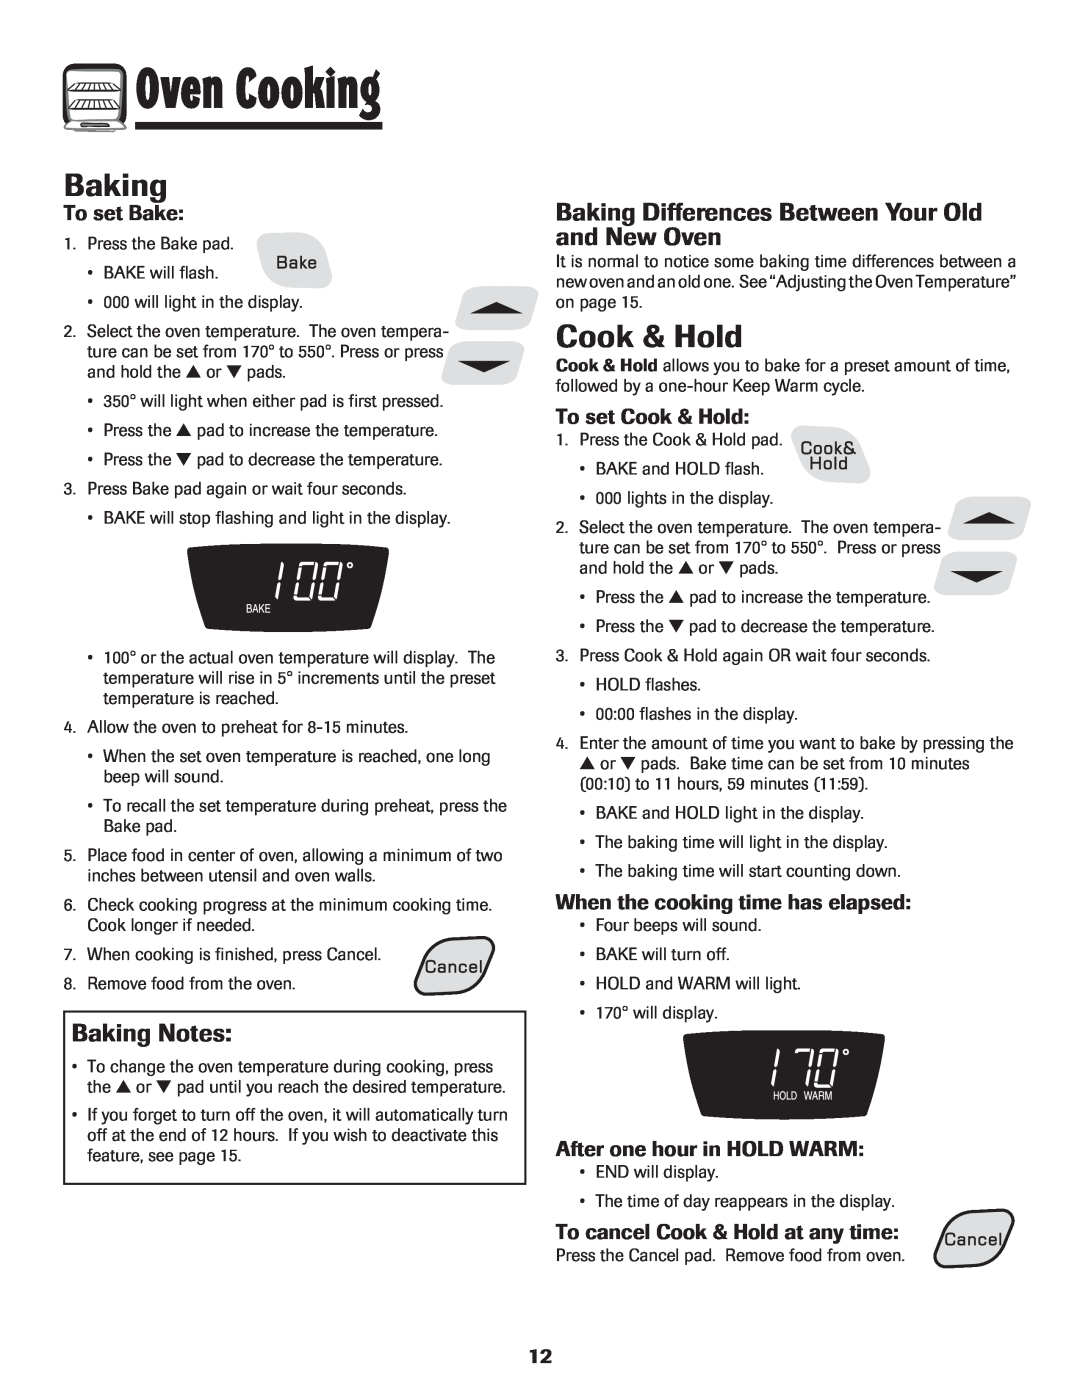 Amana pmn Baking Notes, Baking Differences Between Your Old and New Oven, To set Bake, To set Cook & Hold 